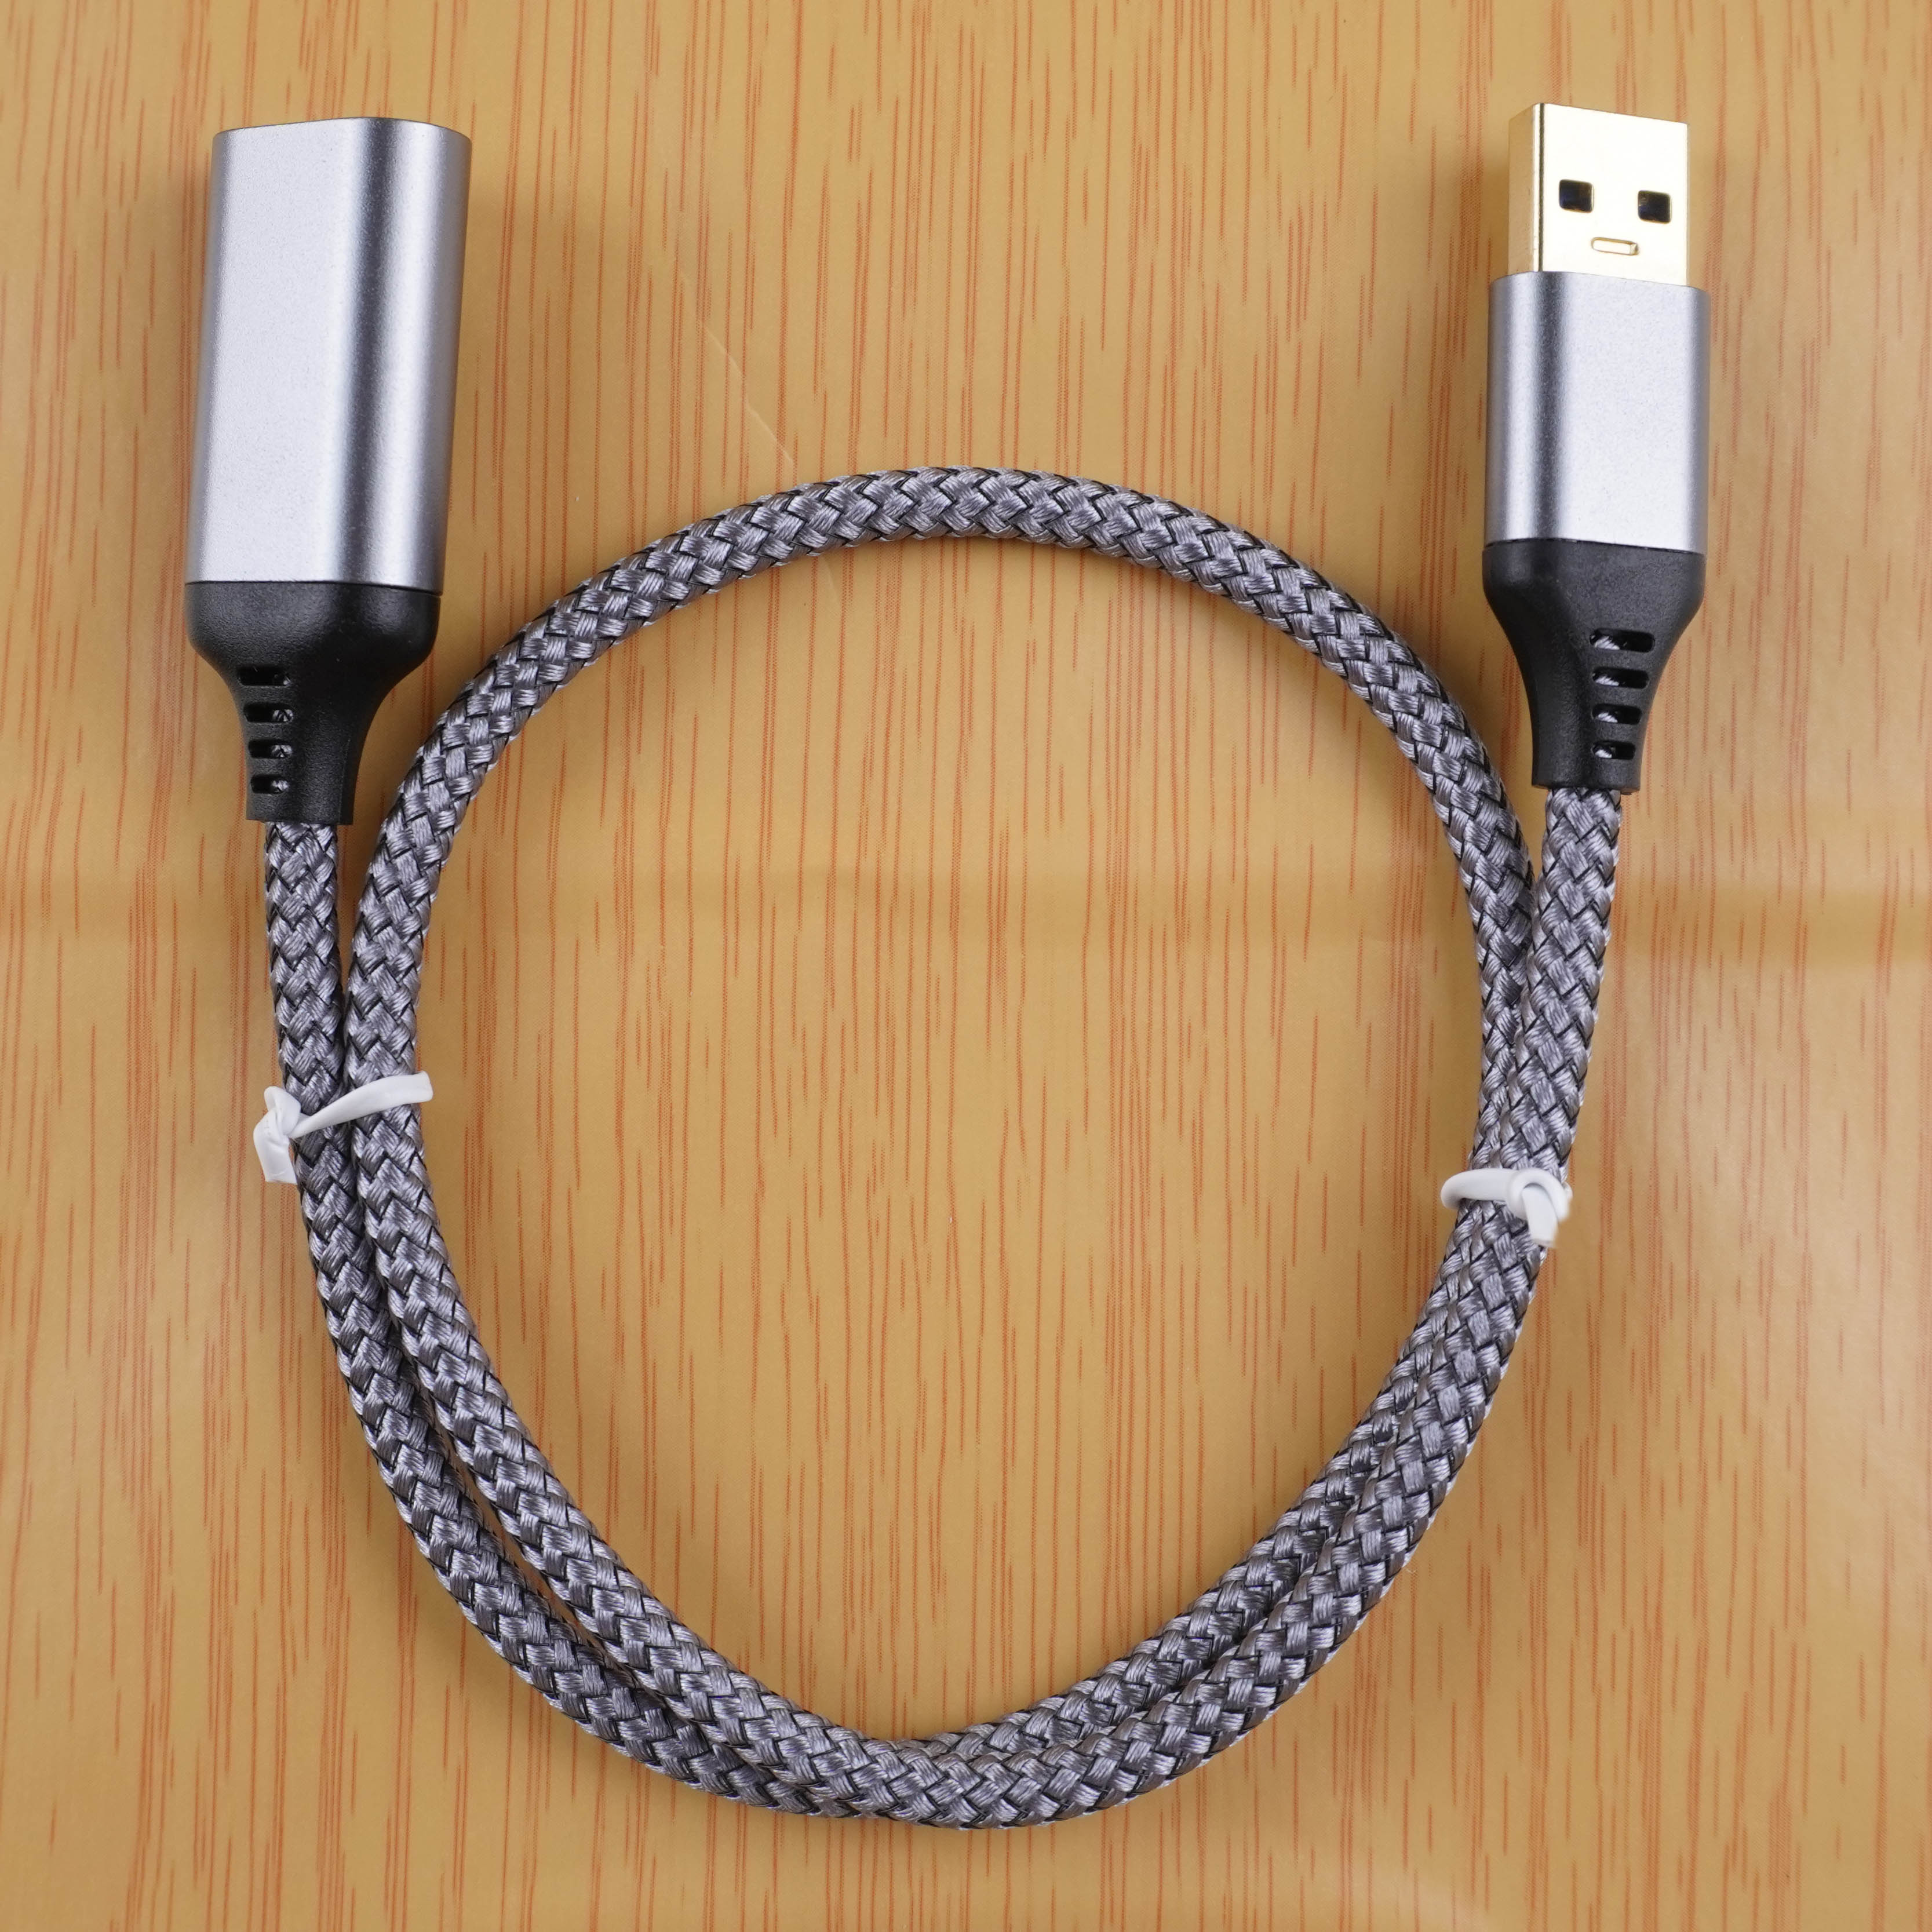 Type A Male to Female Durable Material Fast Data Transfer Cable